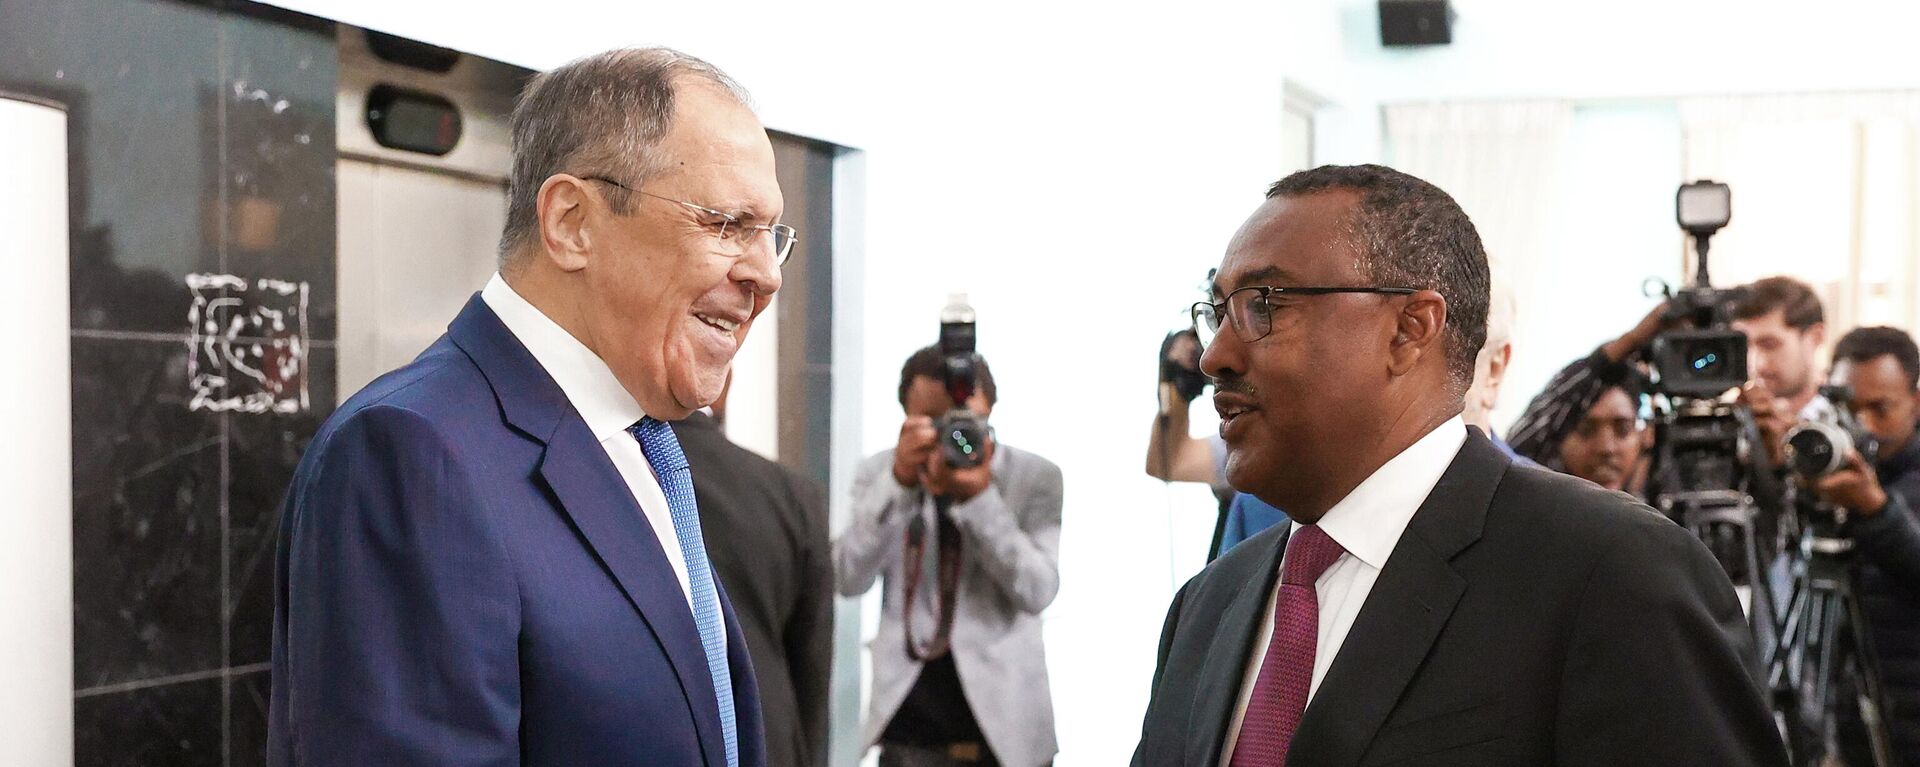 Russian Foreign Minister Sergey Lavrov and his Ethiopian counterpart Demeke Mekonnen shake hands during a meeting in Addis Ababa, Ethiopia - Sputnik International, 1920, 03.09.2022